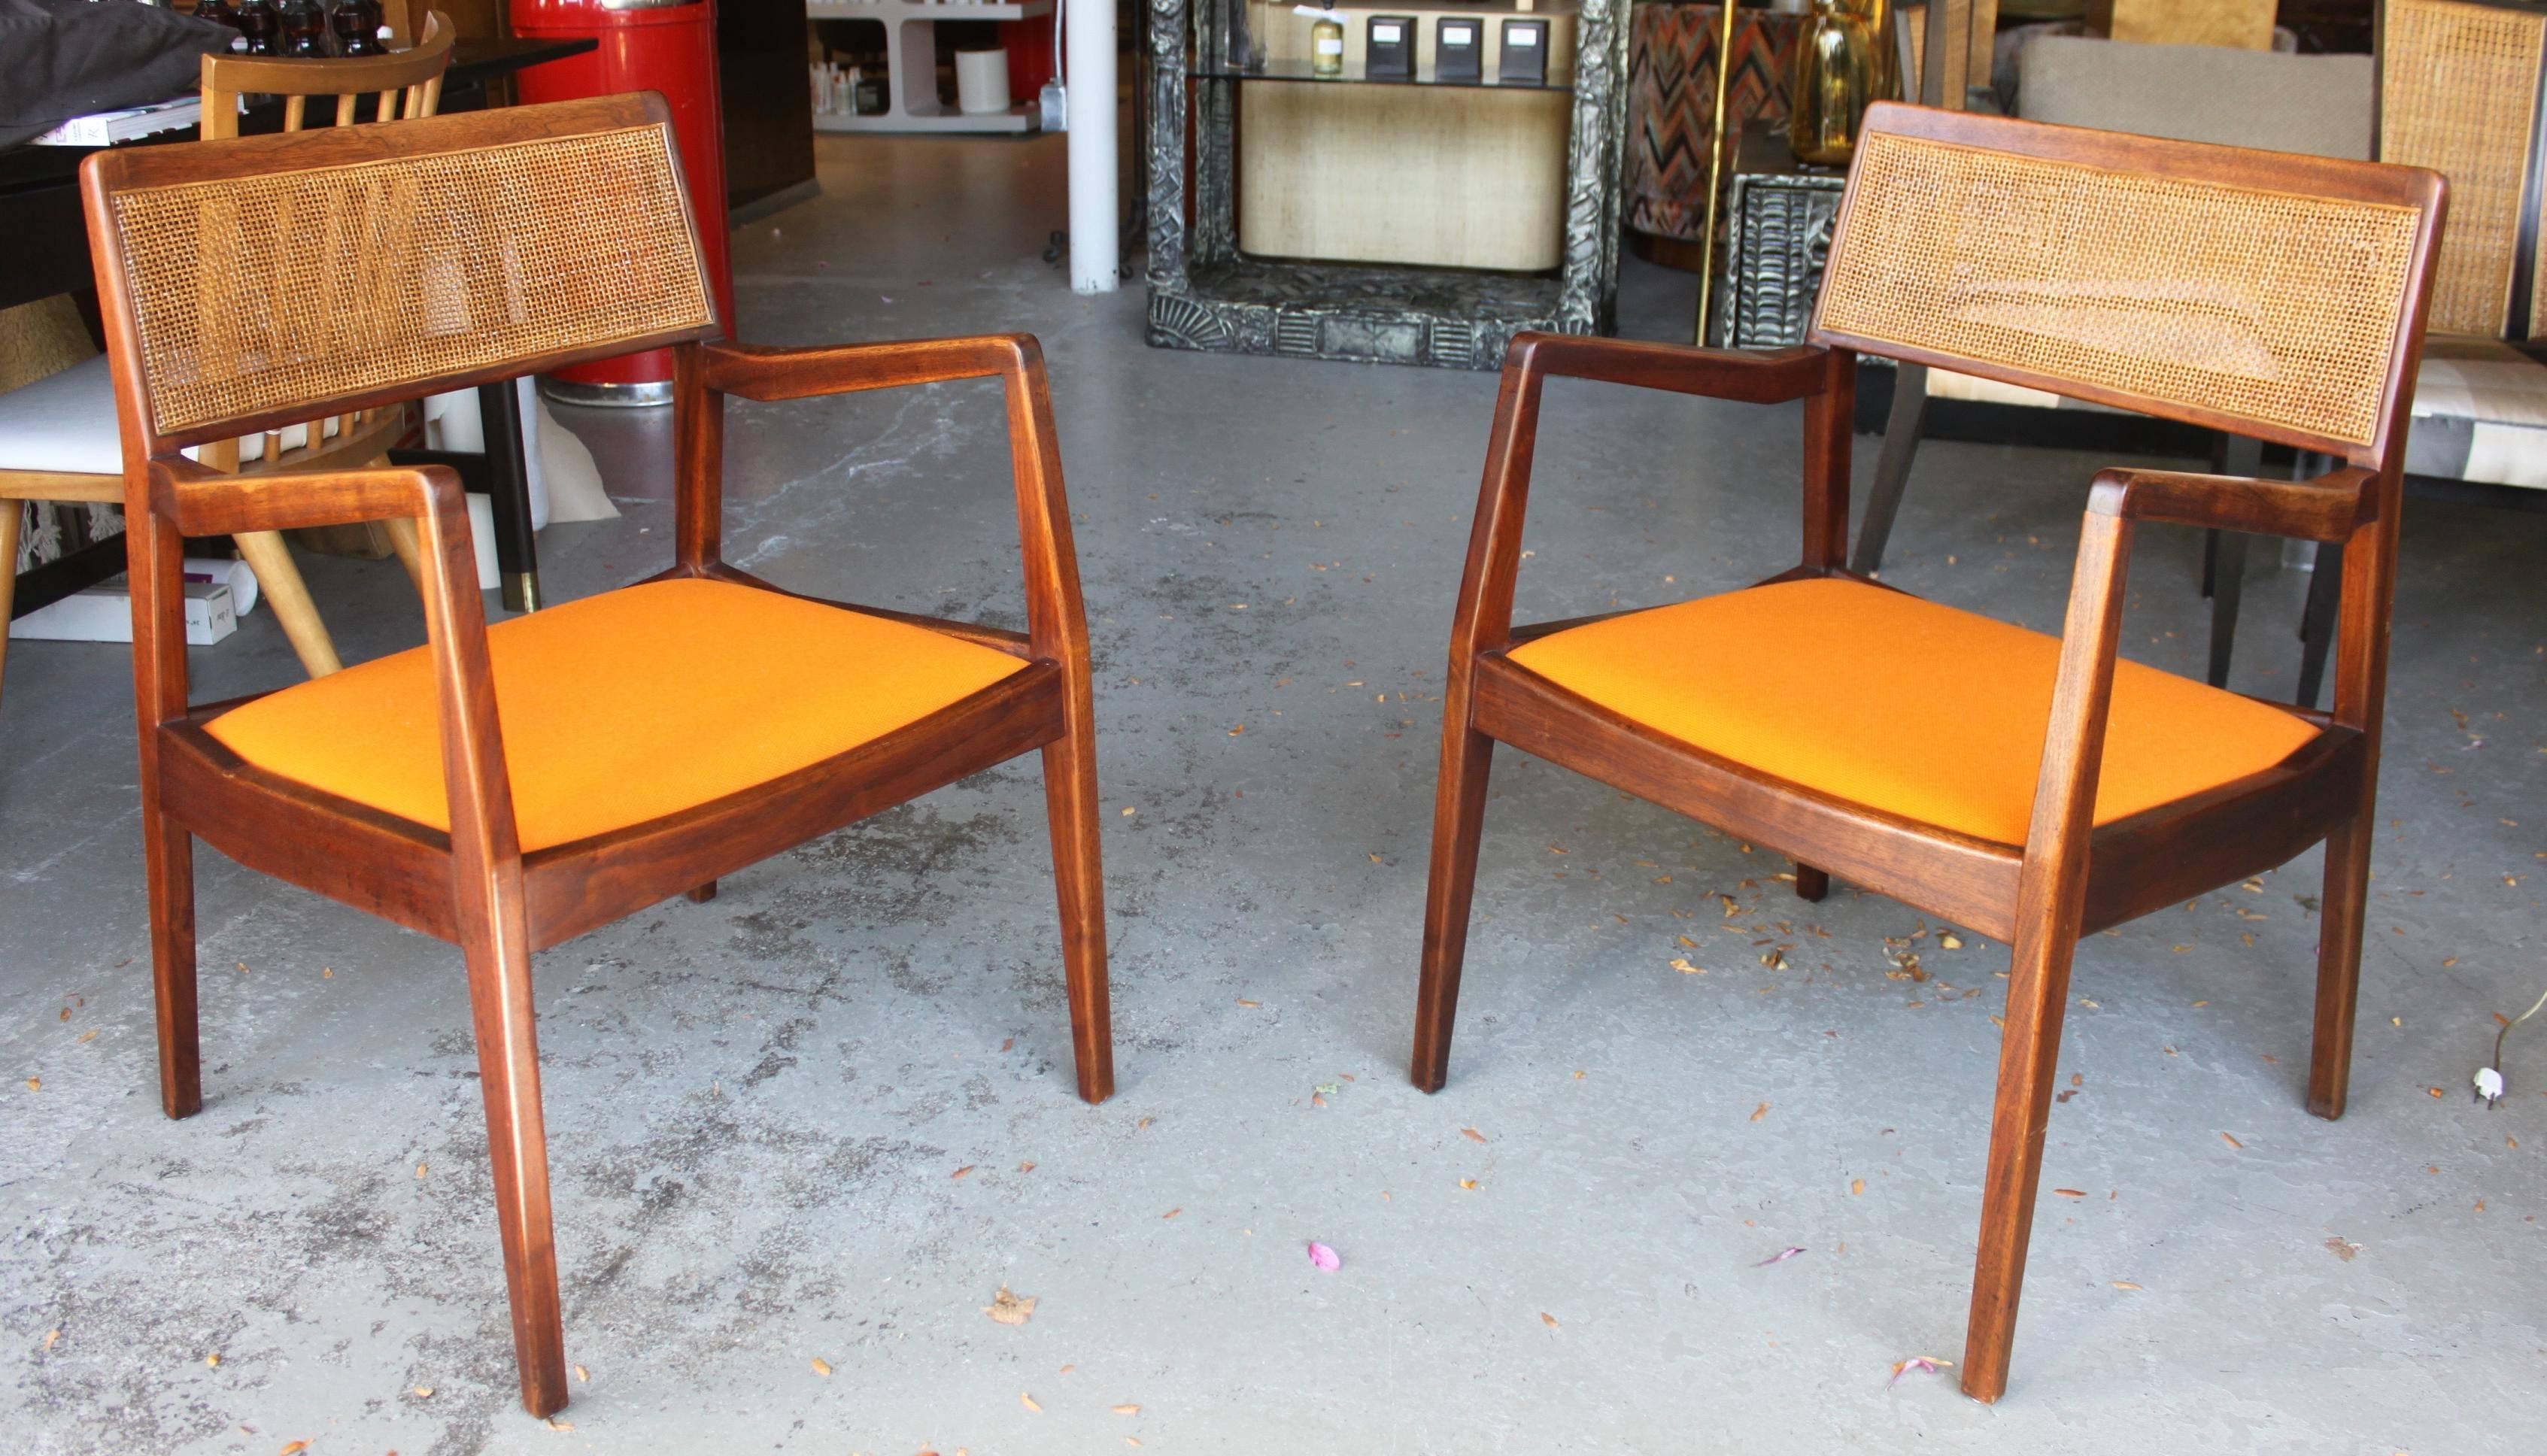 Pair of Jens Risom "Playboy" armchairs. Newly upholstered in vintage fabric. In mint condition.